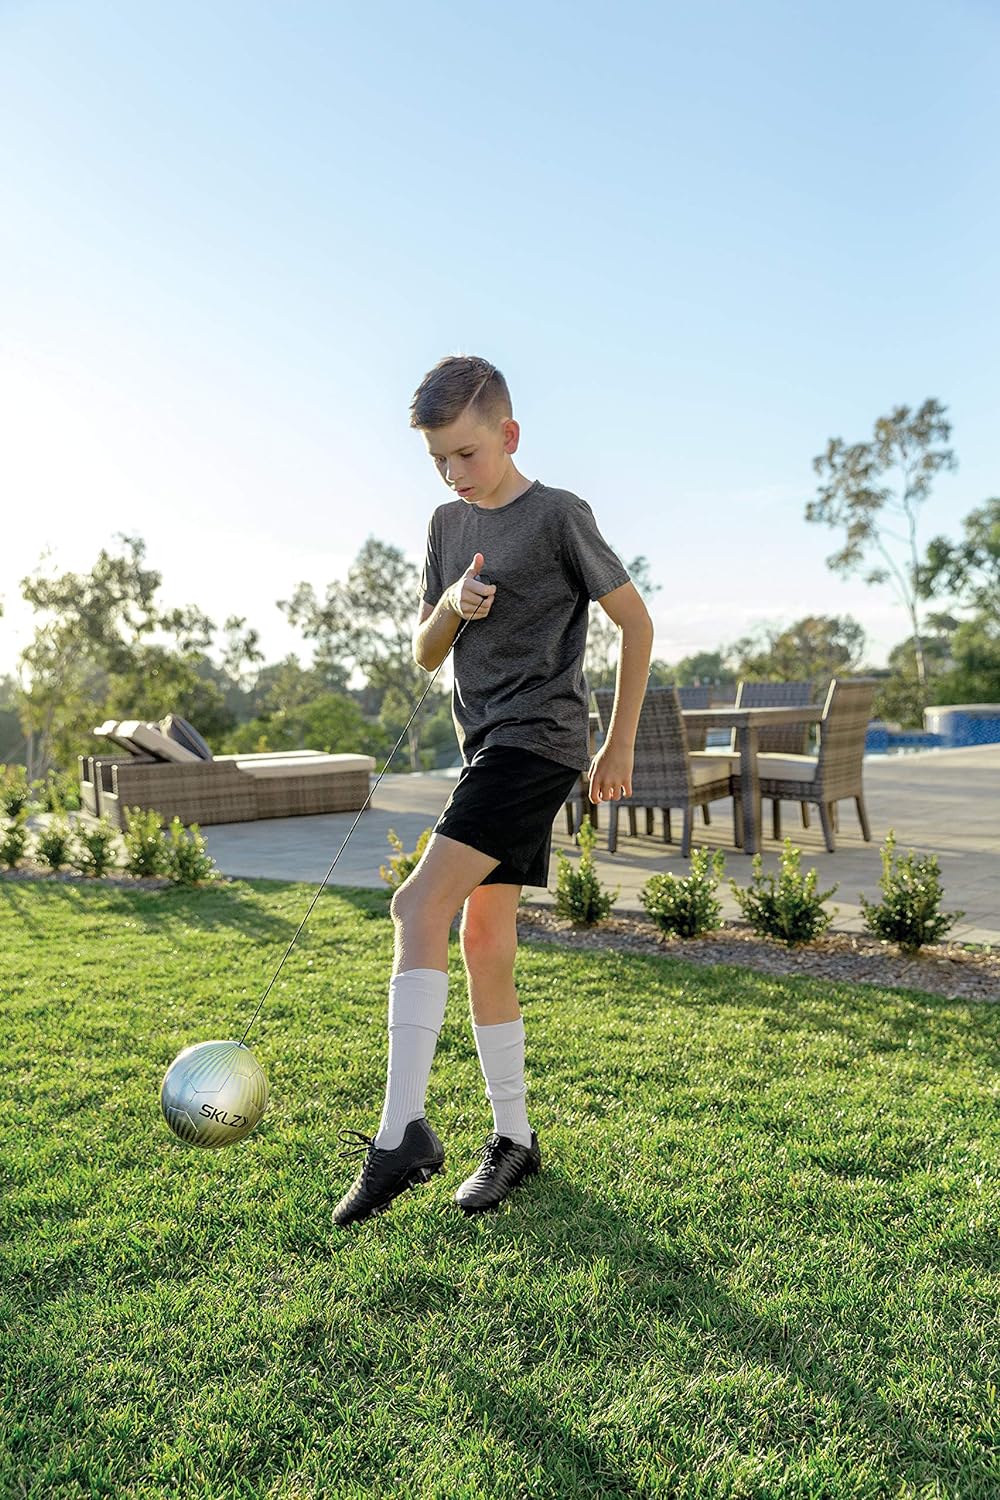 SKLZ Star-Kick Solo Soccer Trainer with Size 1 Soccer Ball